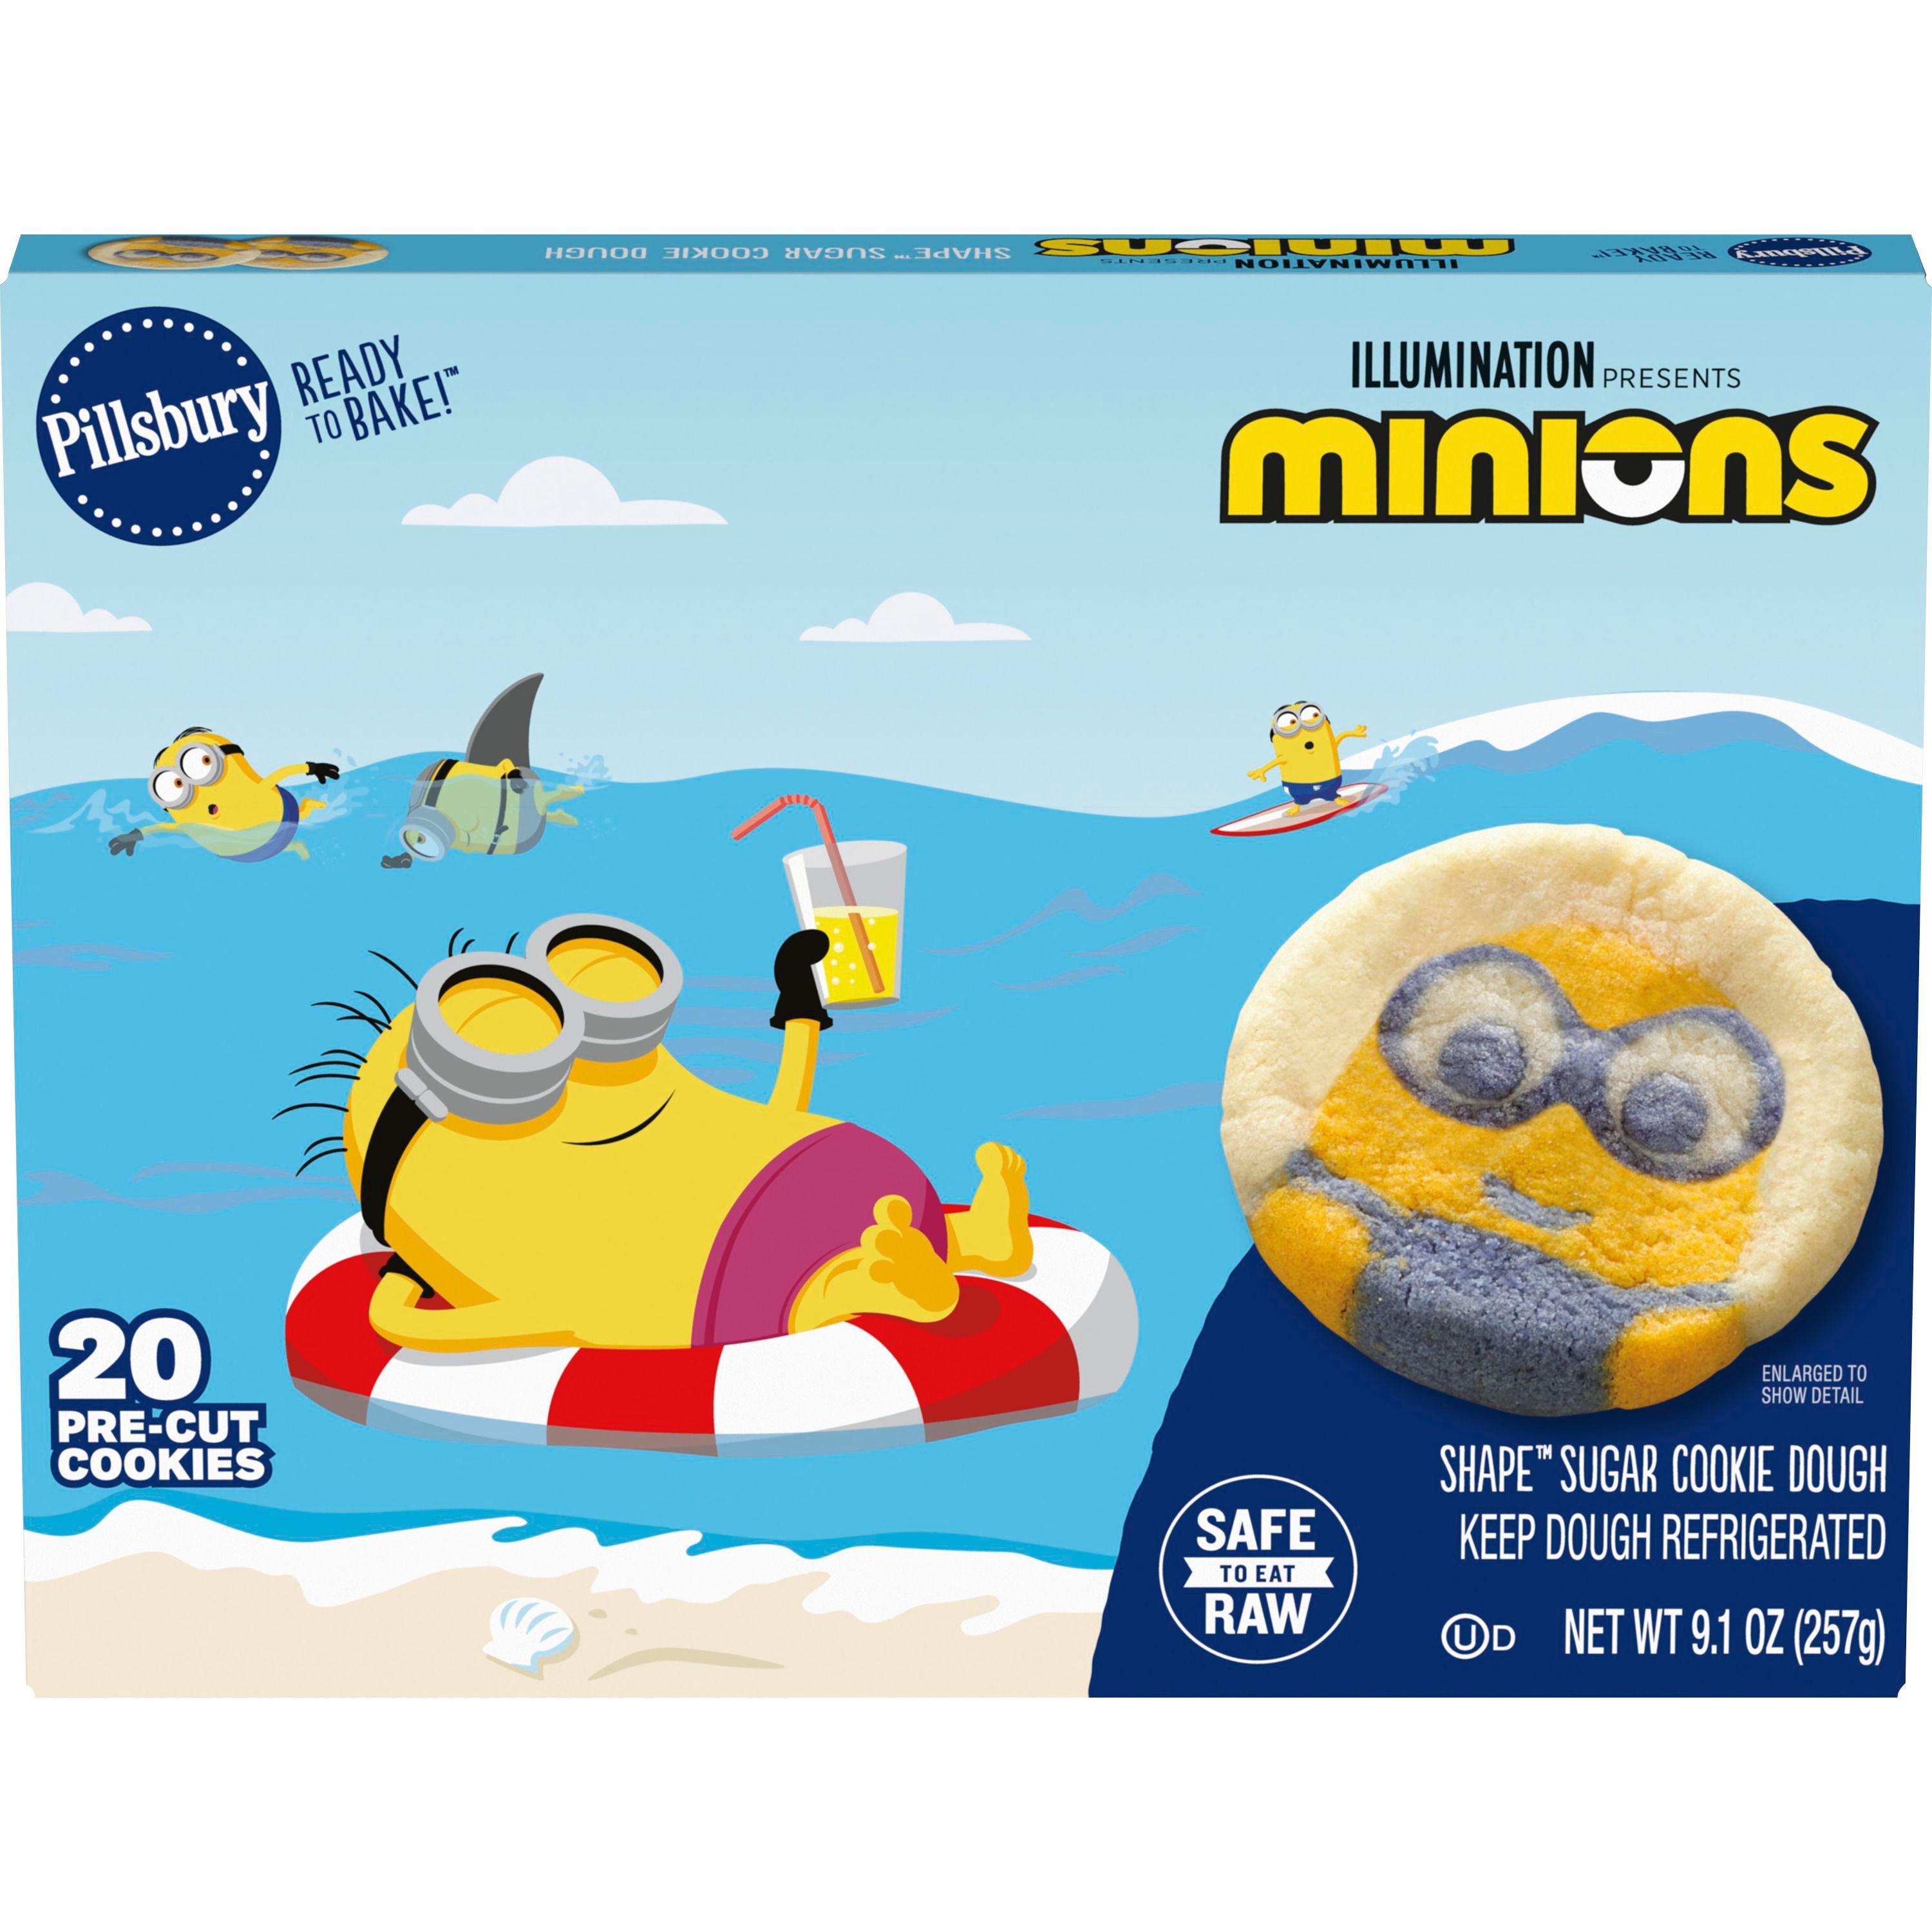 Pillsbury Ready to Bake Minions Shape Sugar Cookie Dough, Limited Edition, 9.1 oz - Front